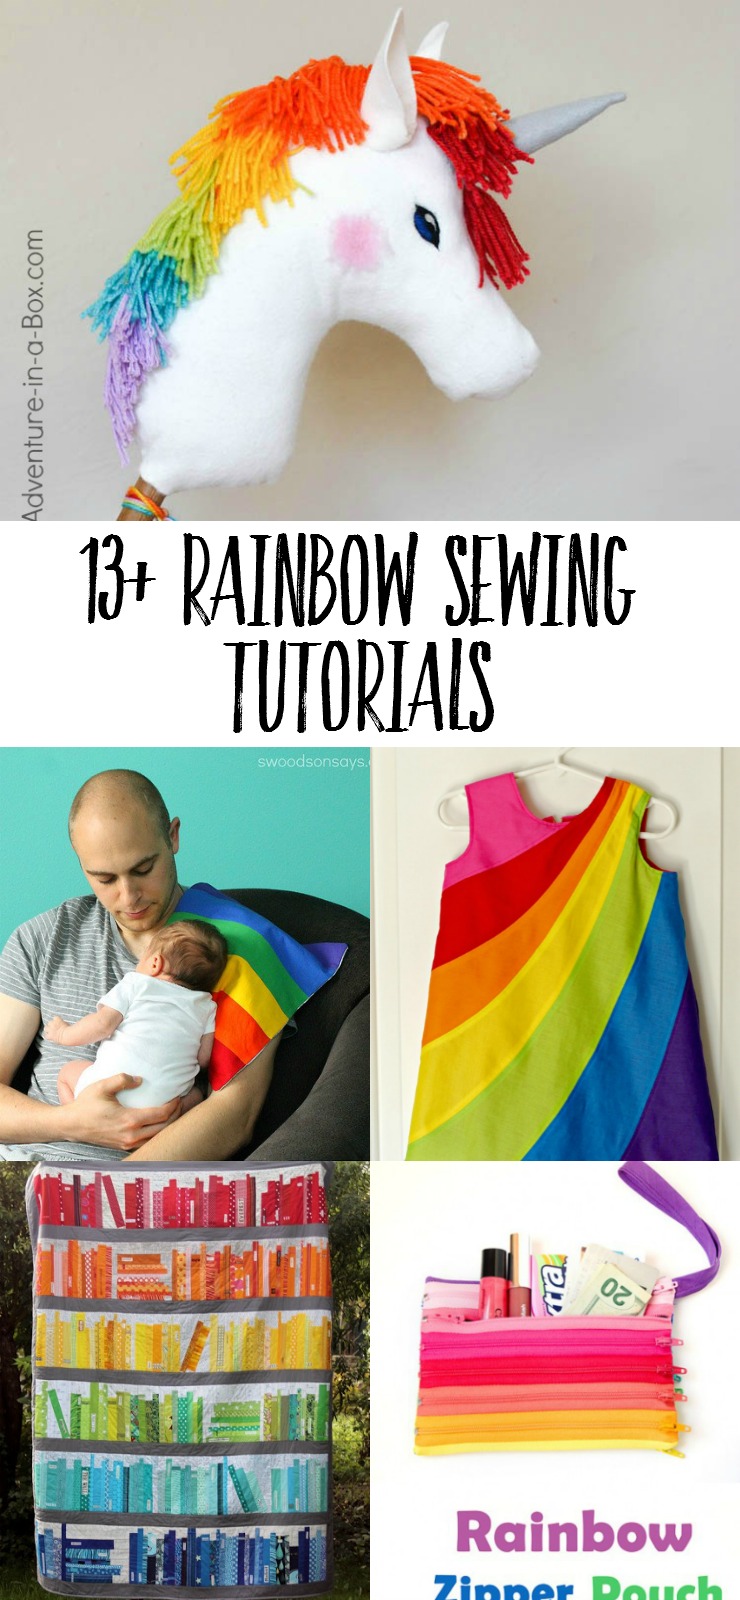 Rainbows are bright and cheery; here are some fresh rainbow sewing projects and tutorials to get you excited about spring! Check out a stuffed rainbow softie, rainbow quilt, rainbow pouches, and more.